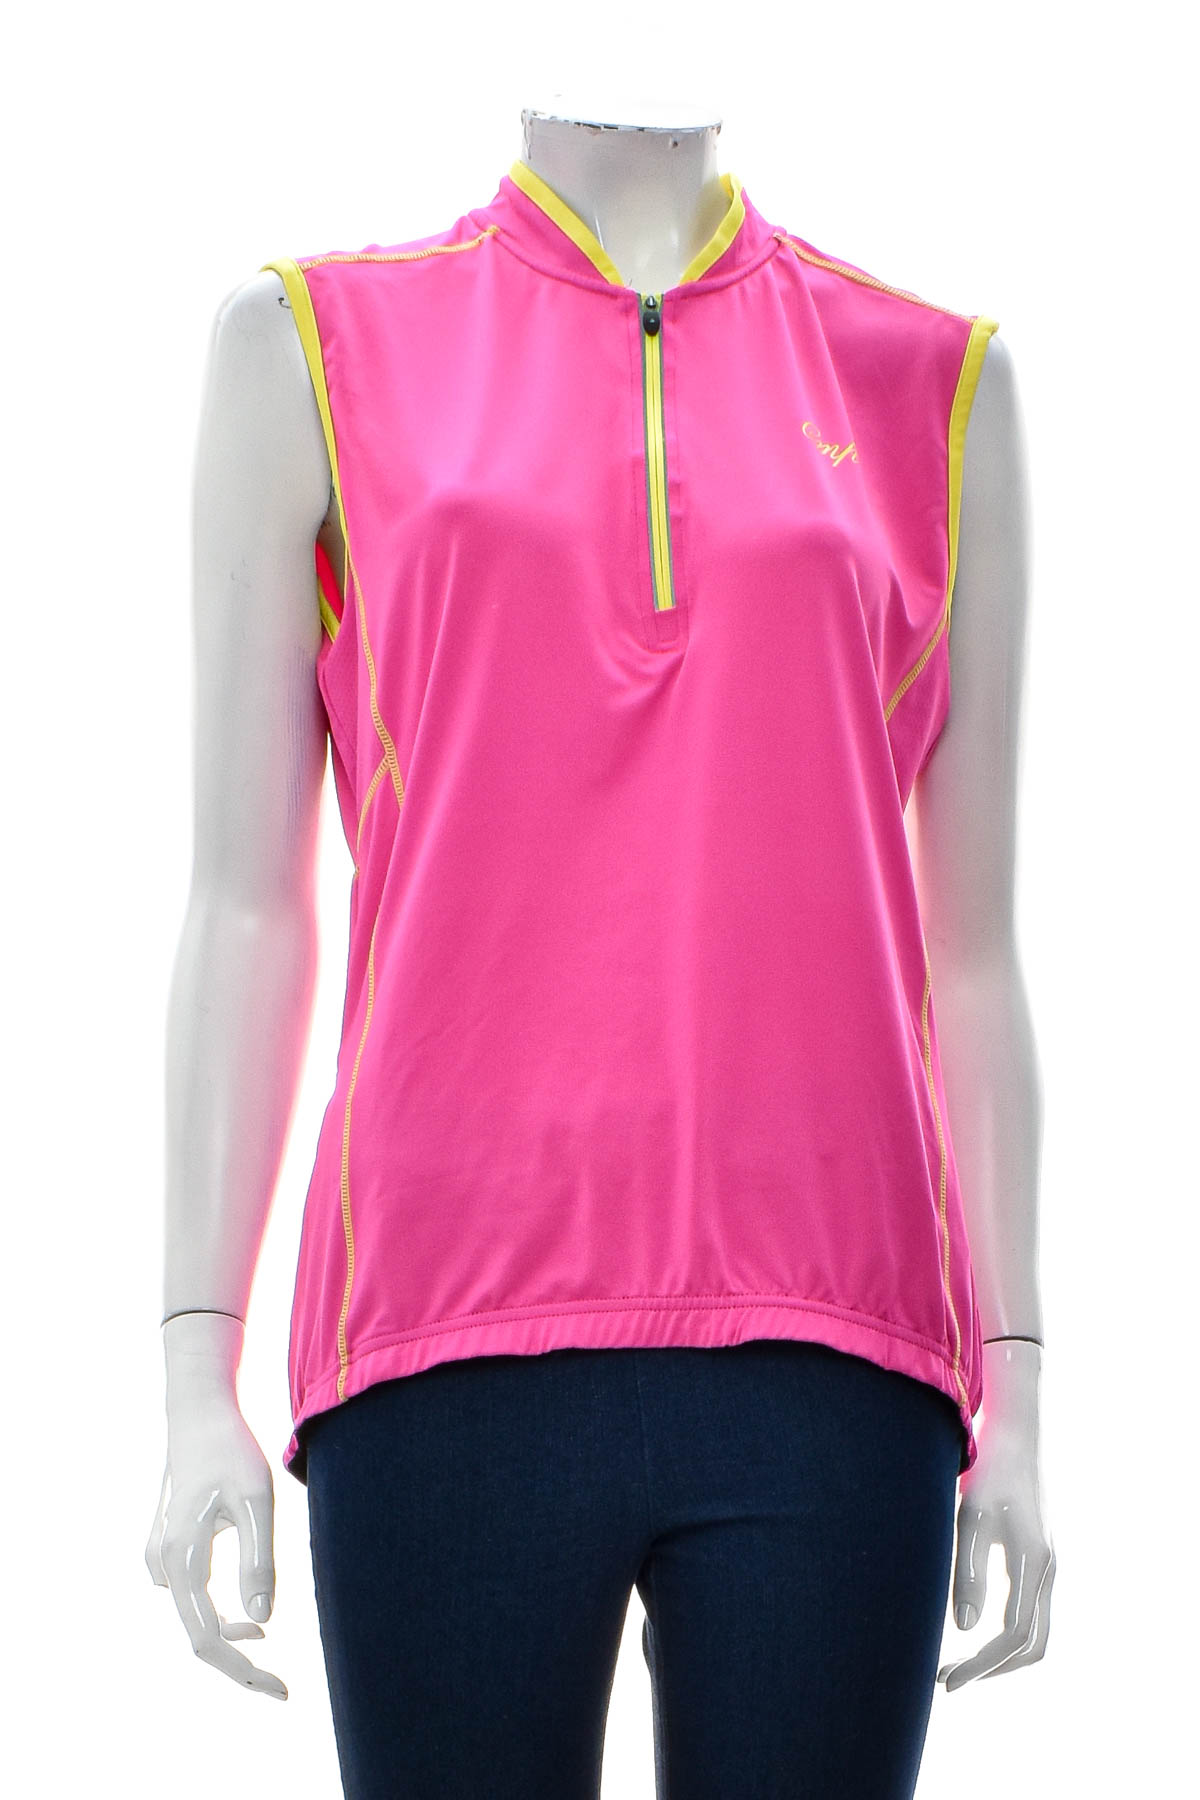 Women's top for cycling - CMP - 0